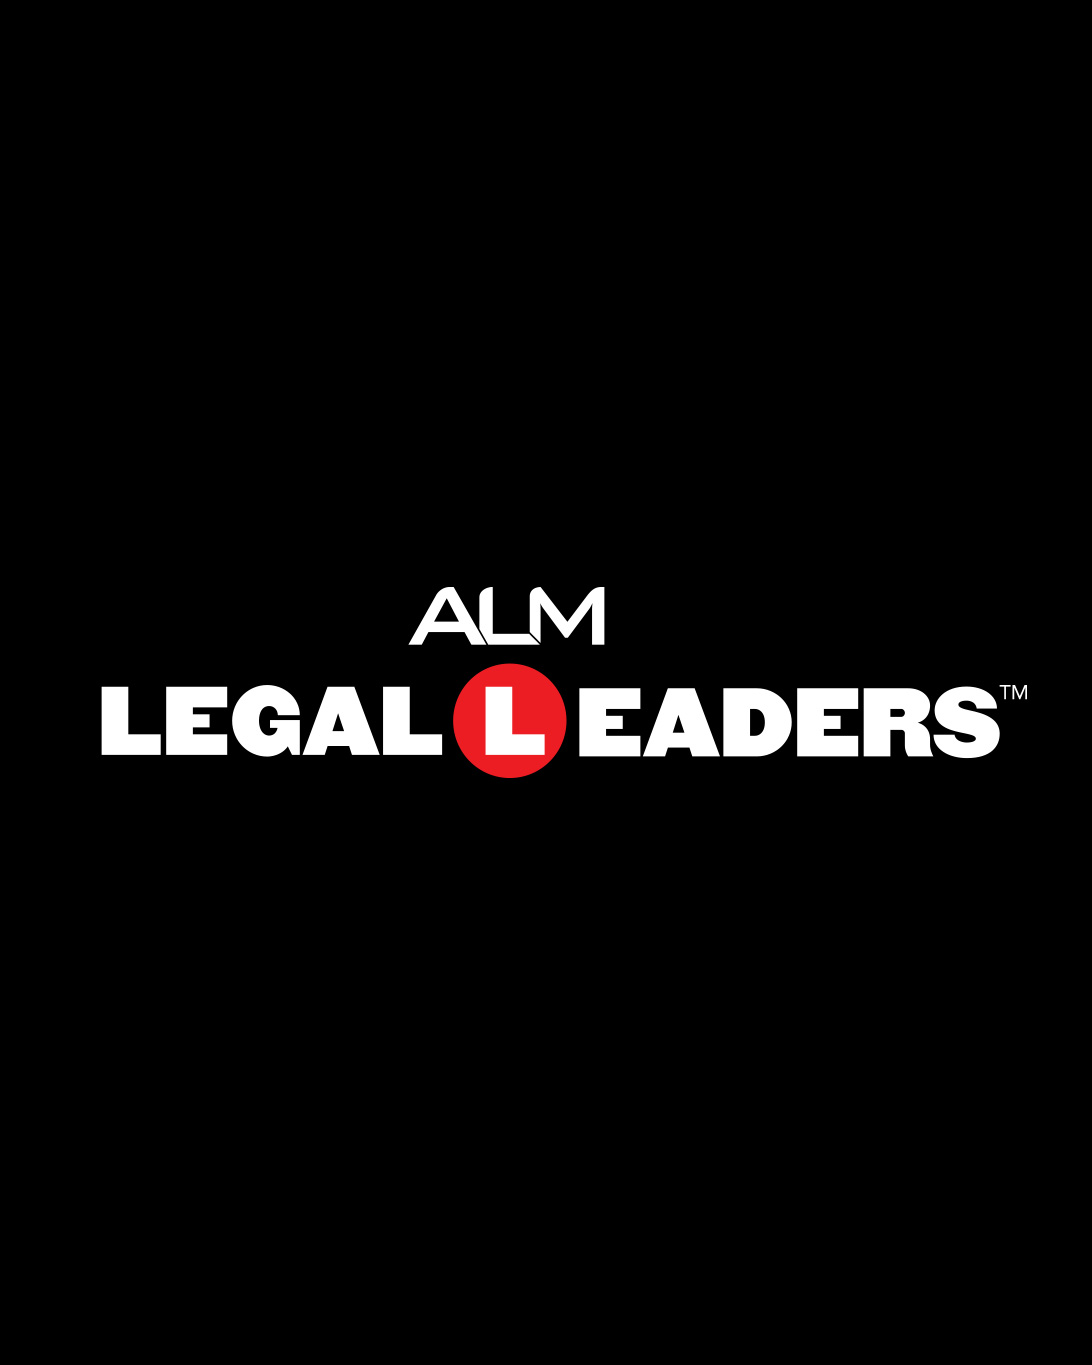 Top Rated Lawyer in Toronto Legal Leaders